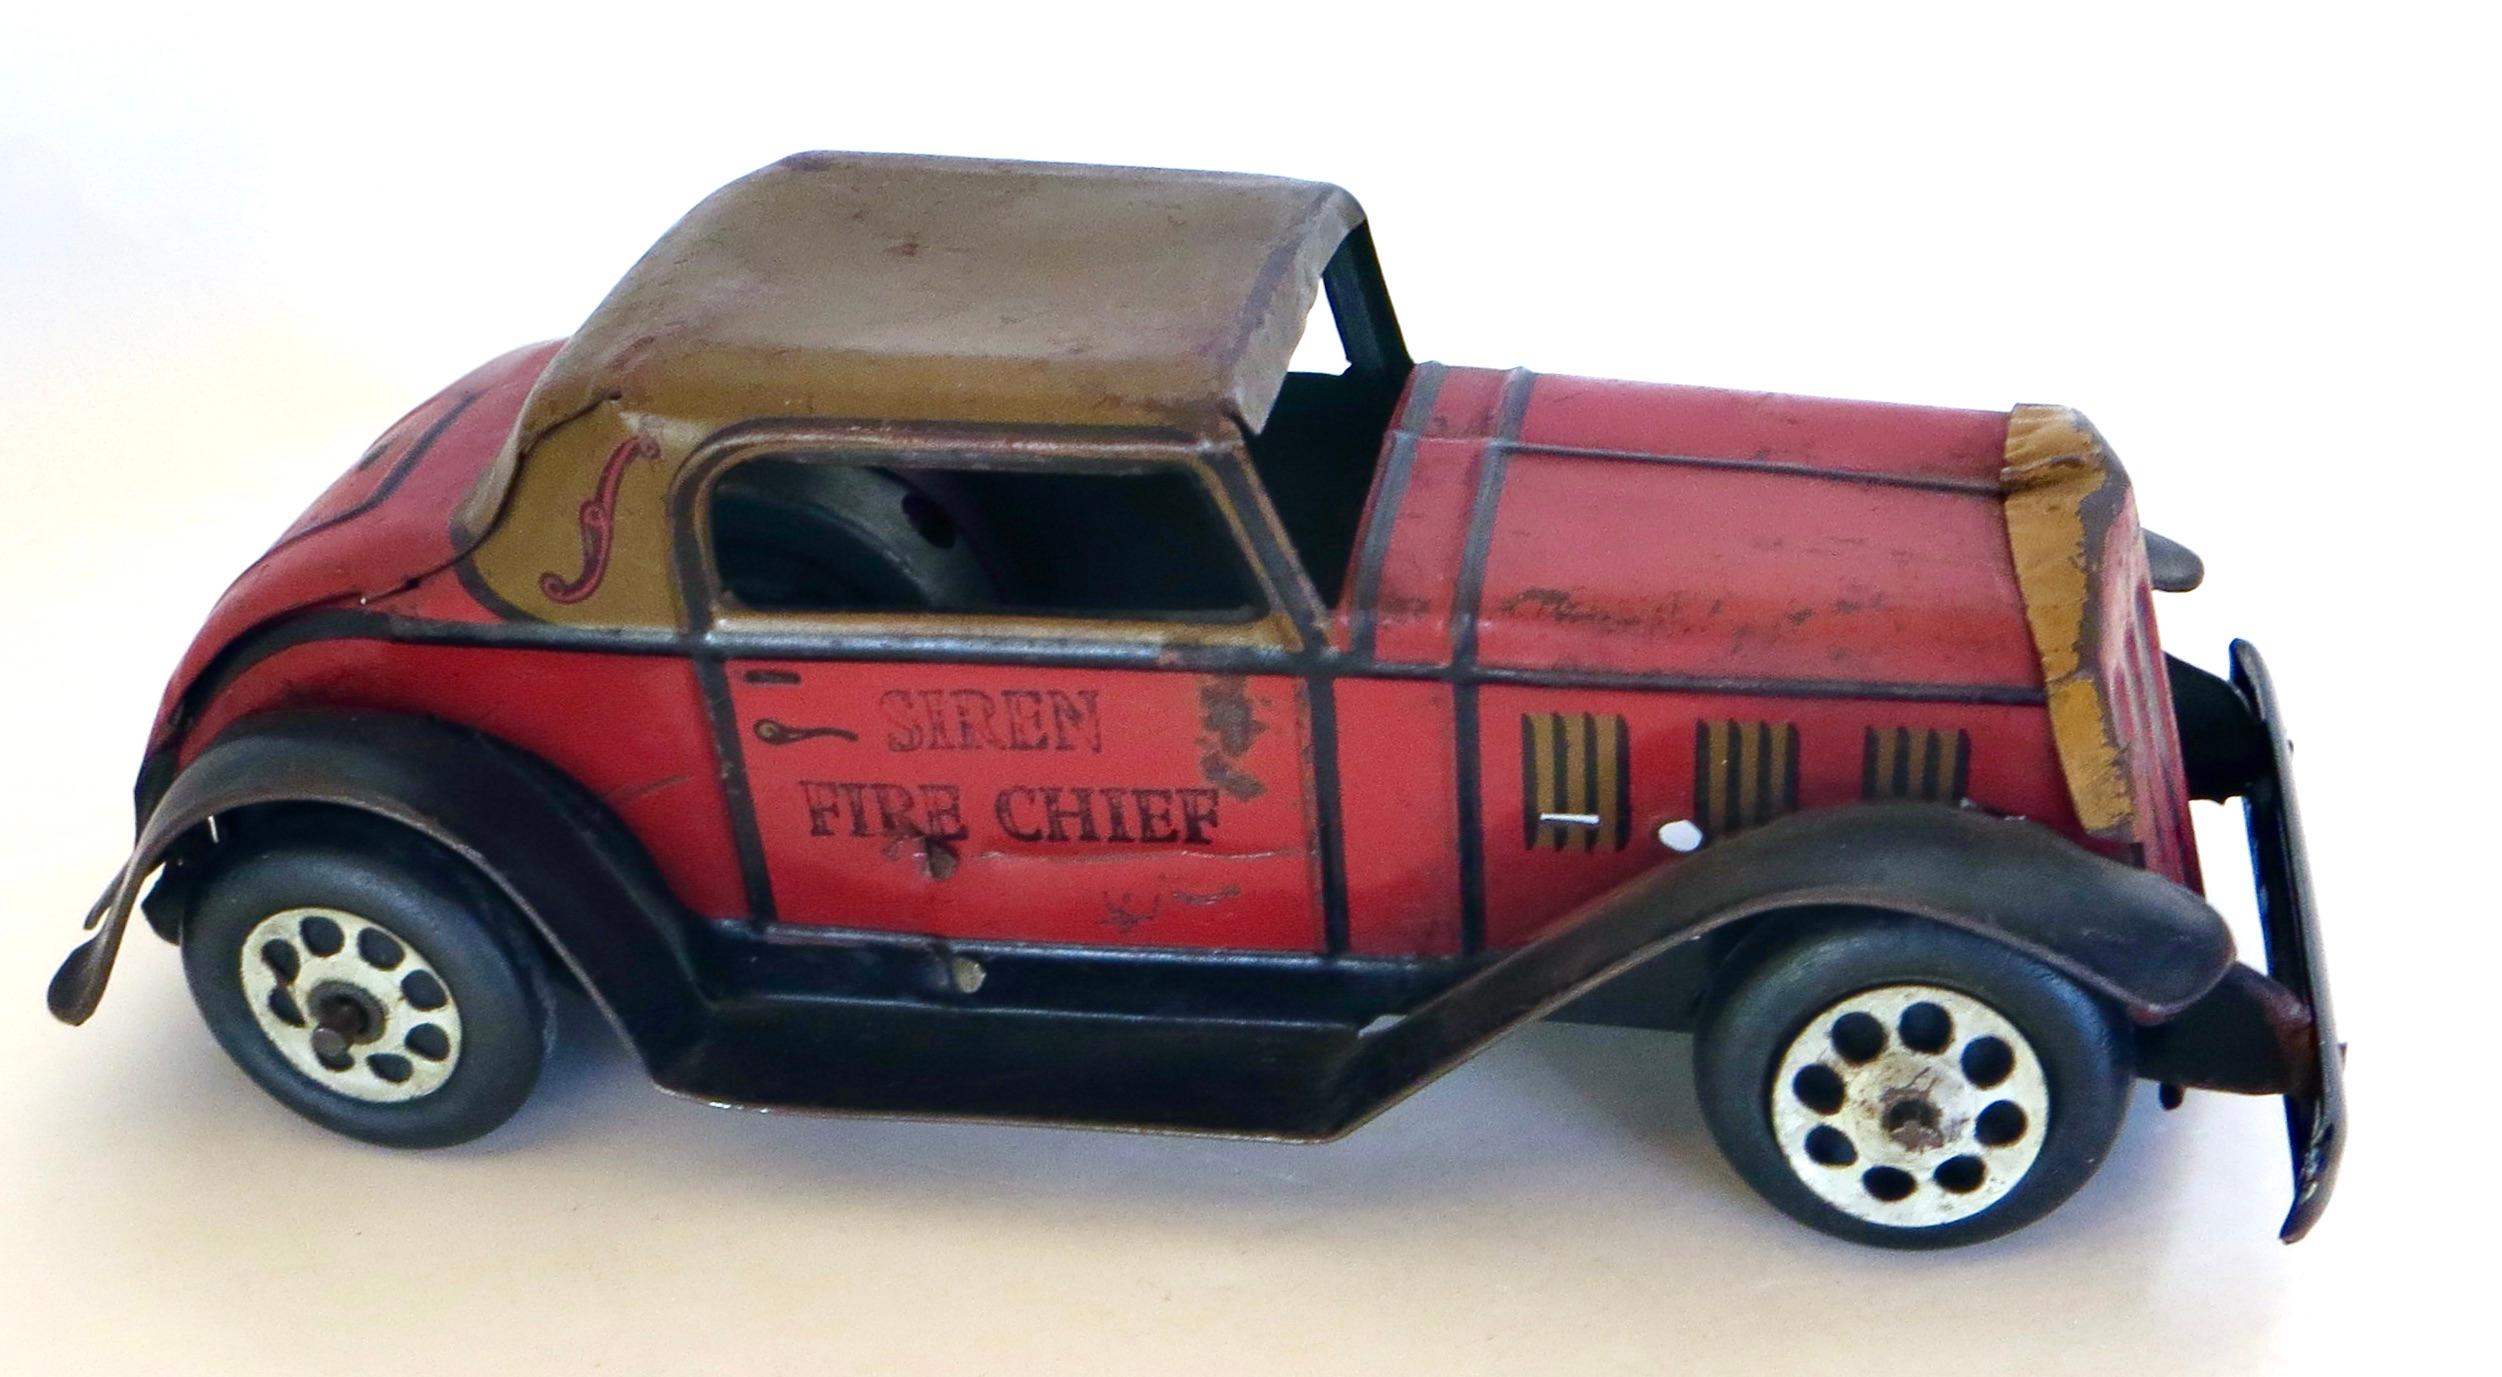 This original vintage friction activated toy sedan